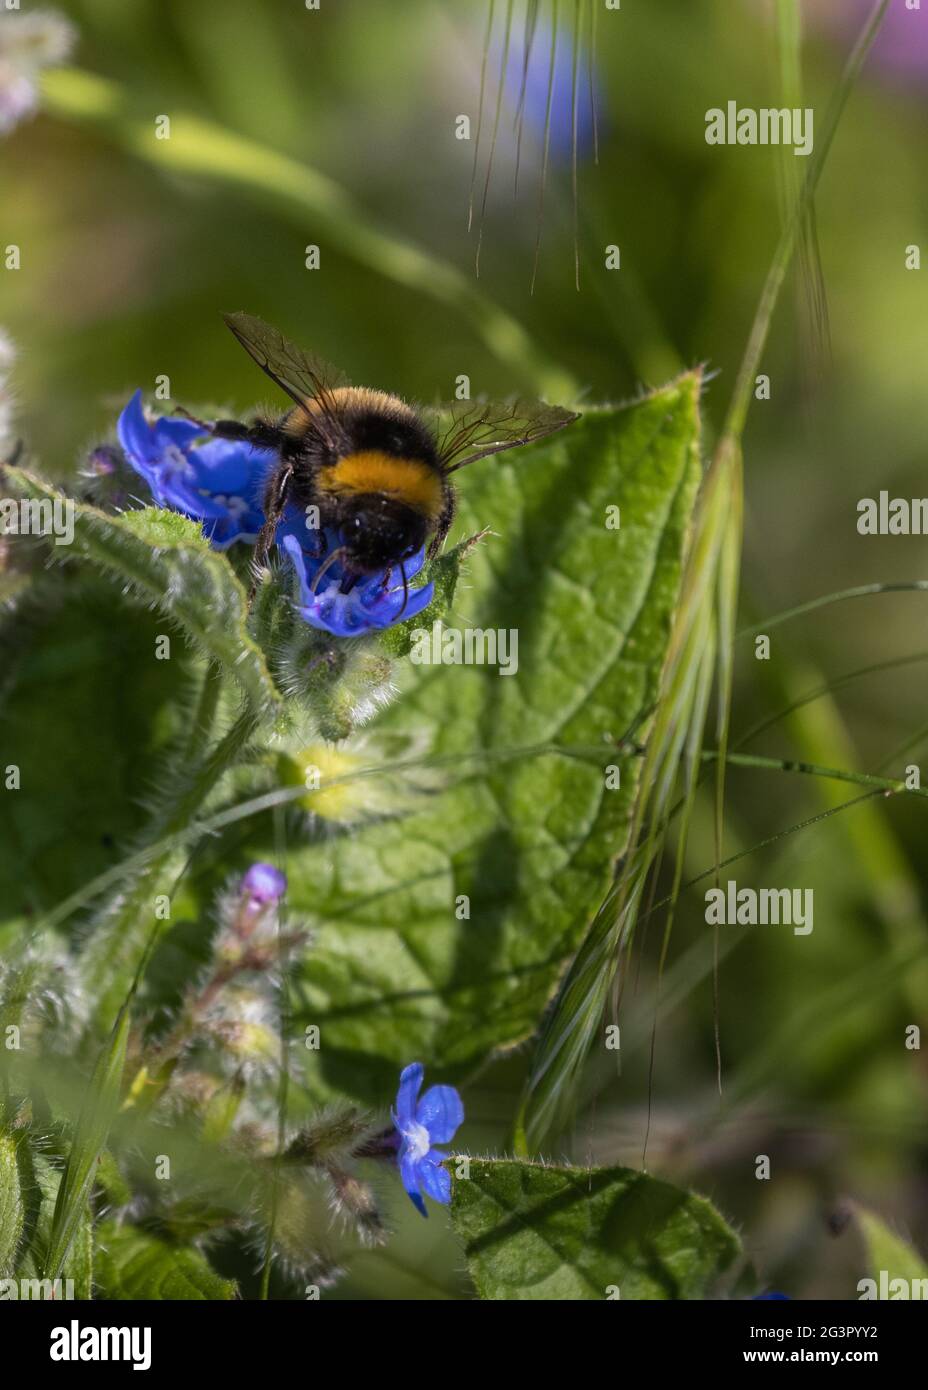 During summer in a southern England coastal garden a worker buff-tailed bumblebee lands on flower. Bees pollinated 75% of flowers, 35% crops Stock Photo